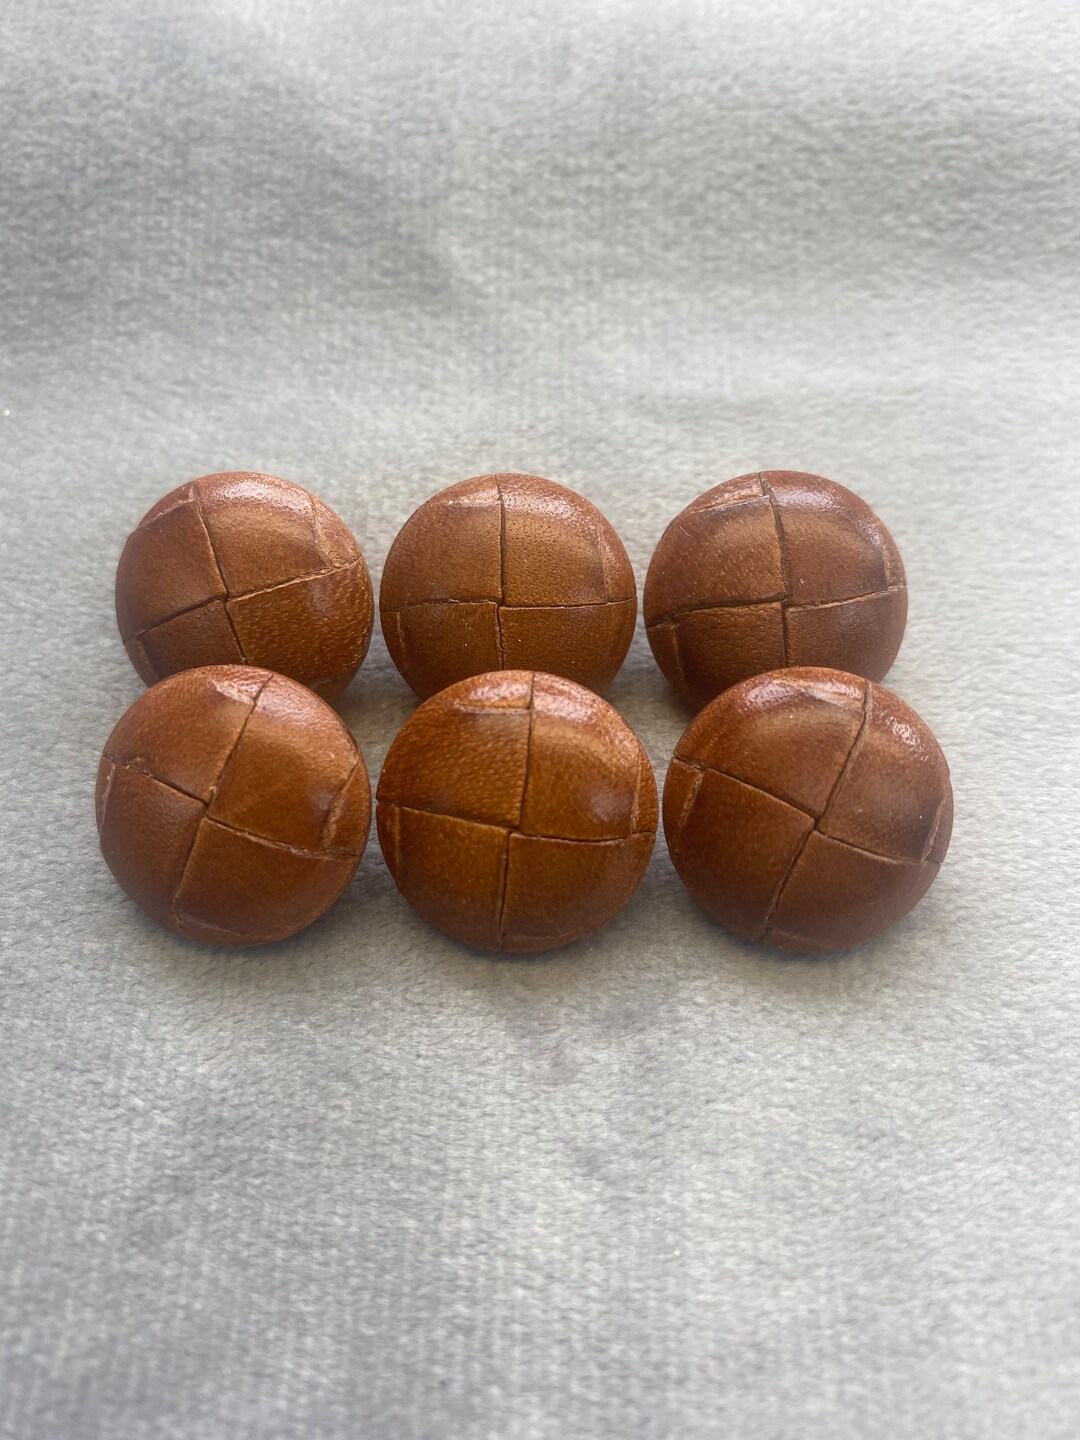 Leather Buttons Tan Football Design Vintage 18mm a Set of 6 - Etsy